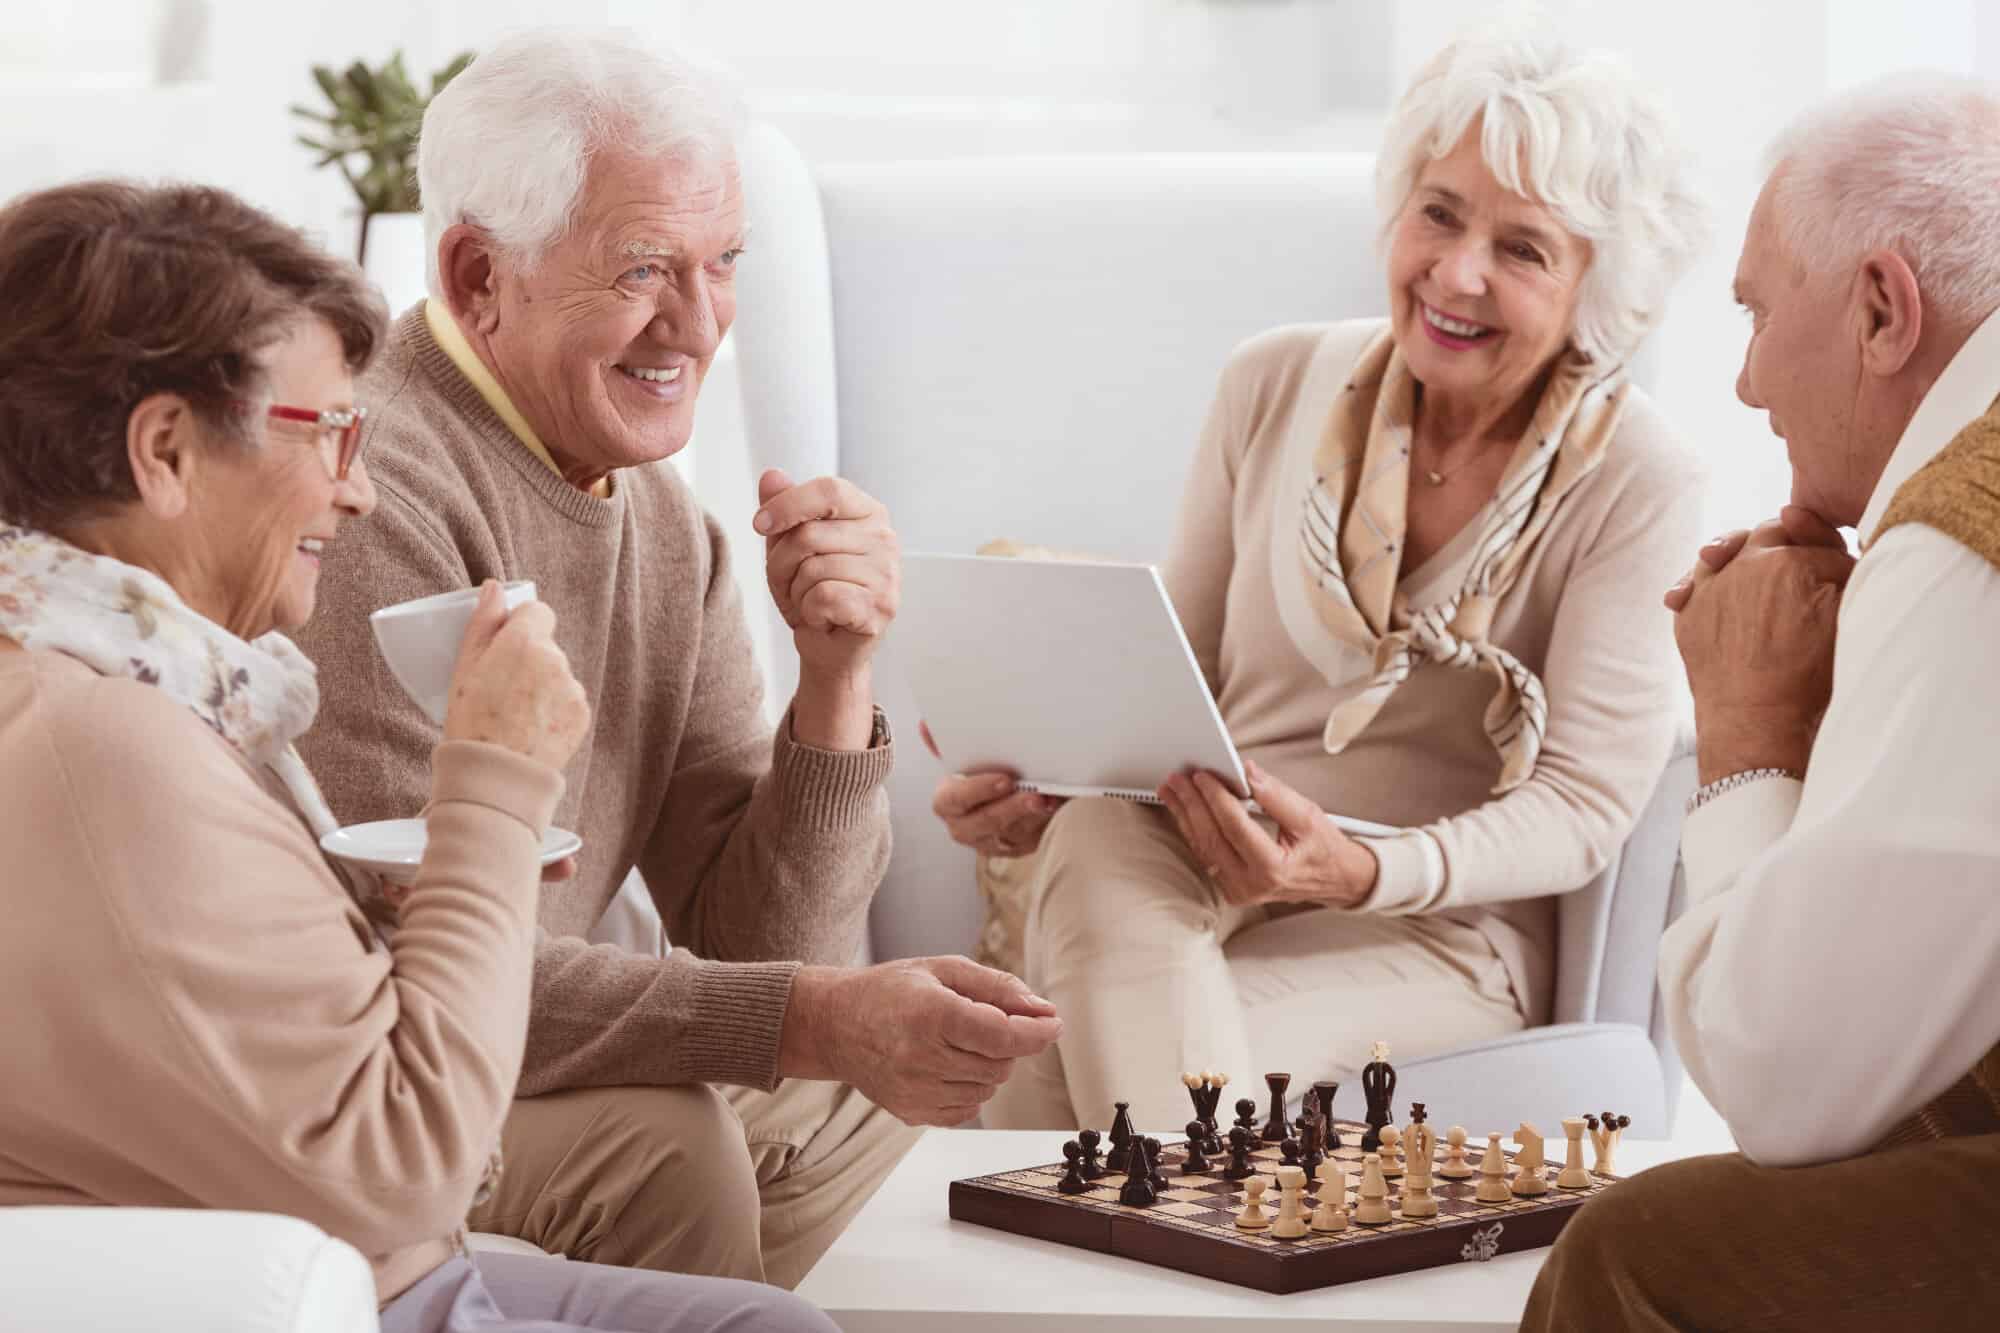 Group of senior citizens having fun and playing chess